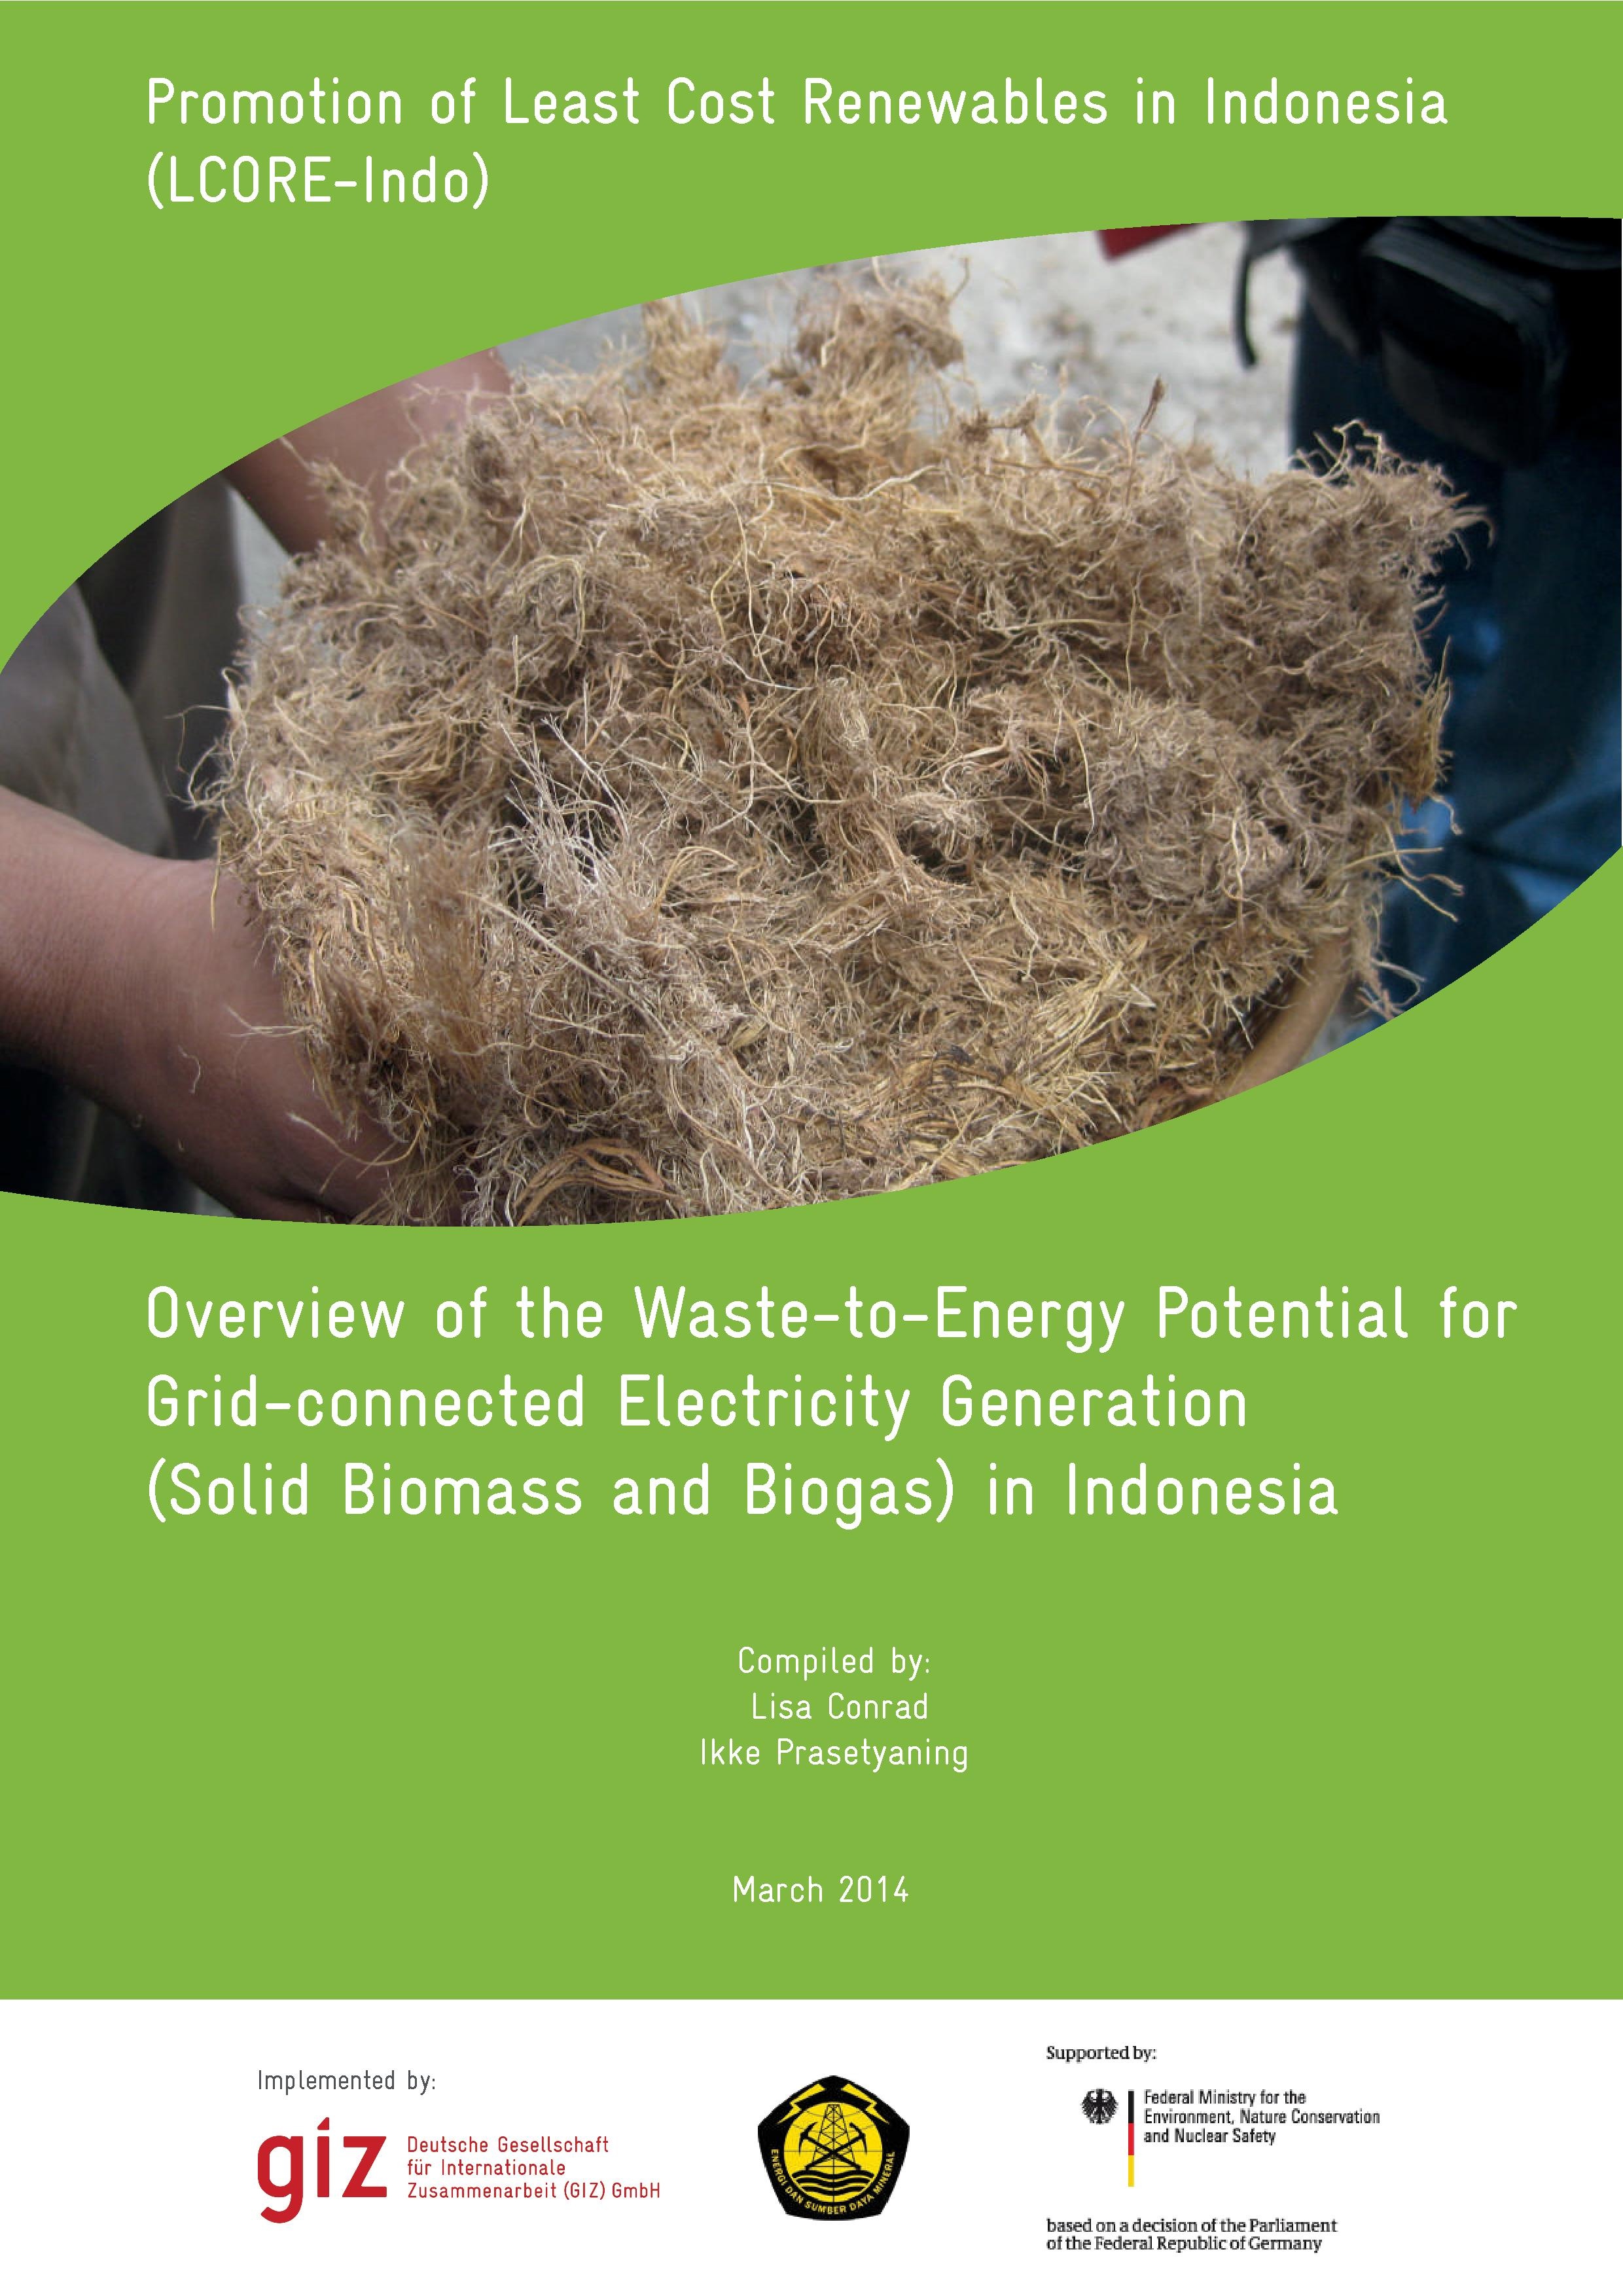 Overview of the Waste-to-Energy Potential for Grid-connected Electricity Generation (Solid Biomass and Biogas) in Indonesia